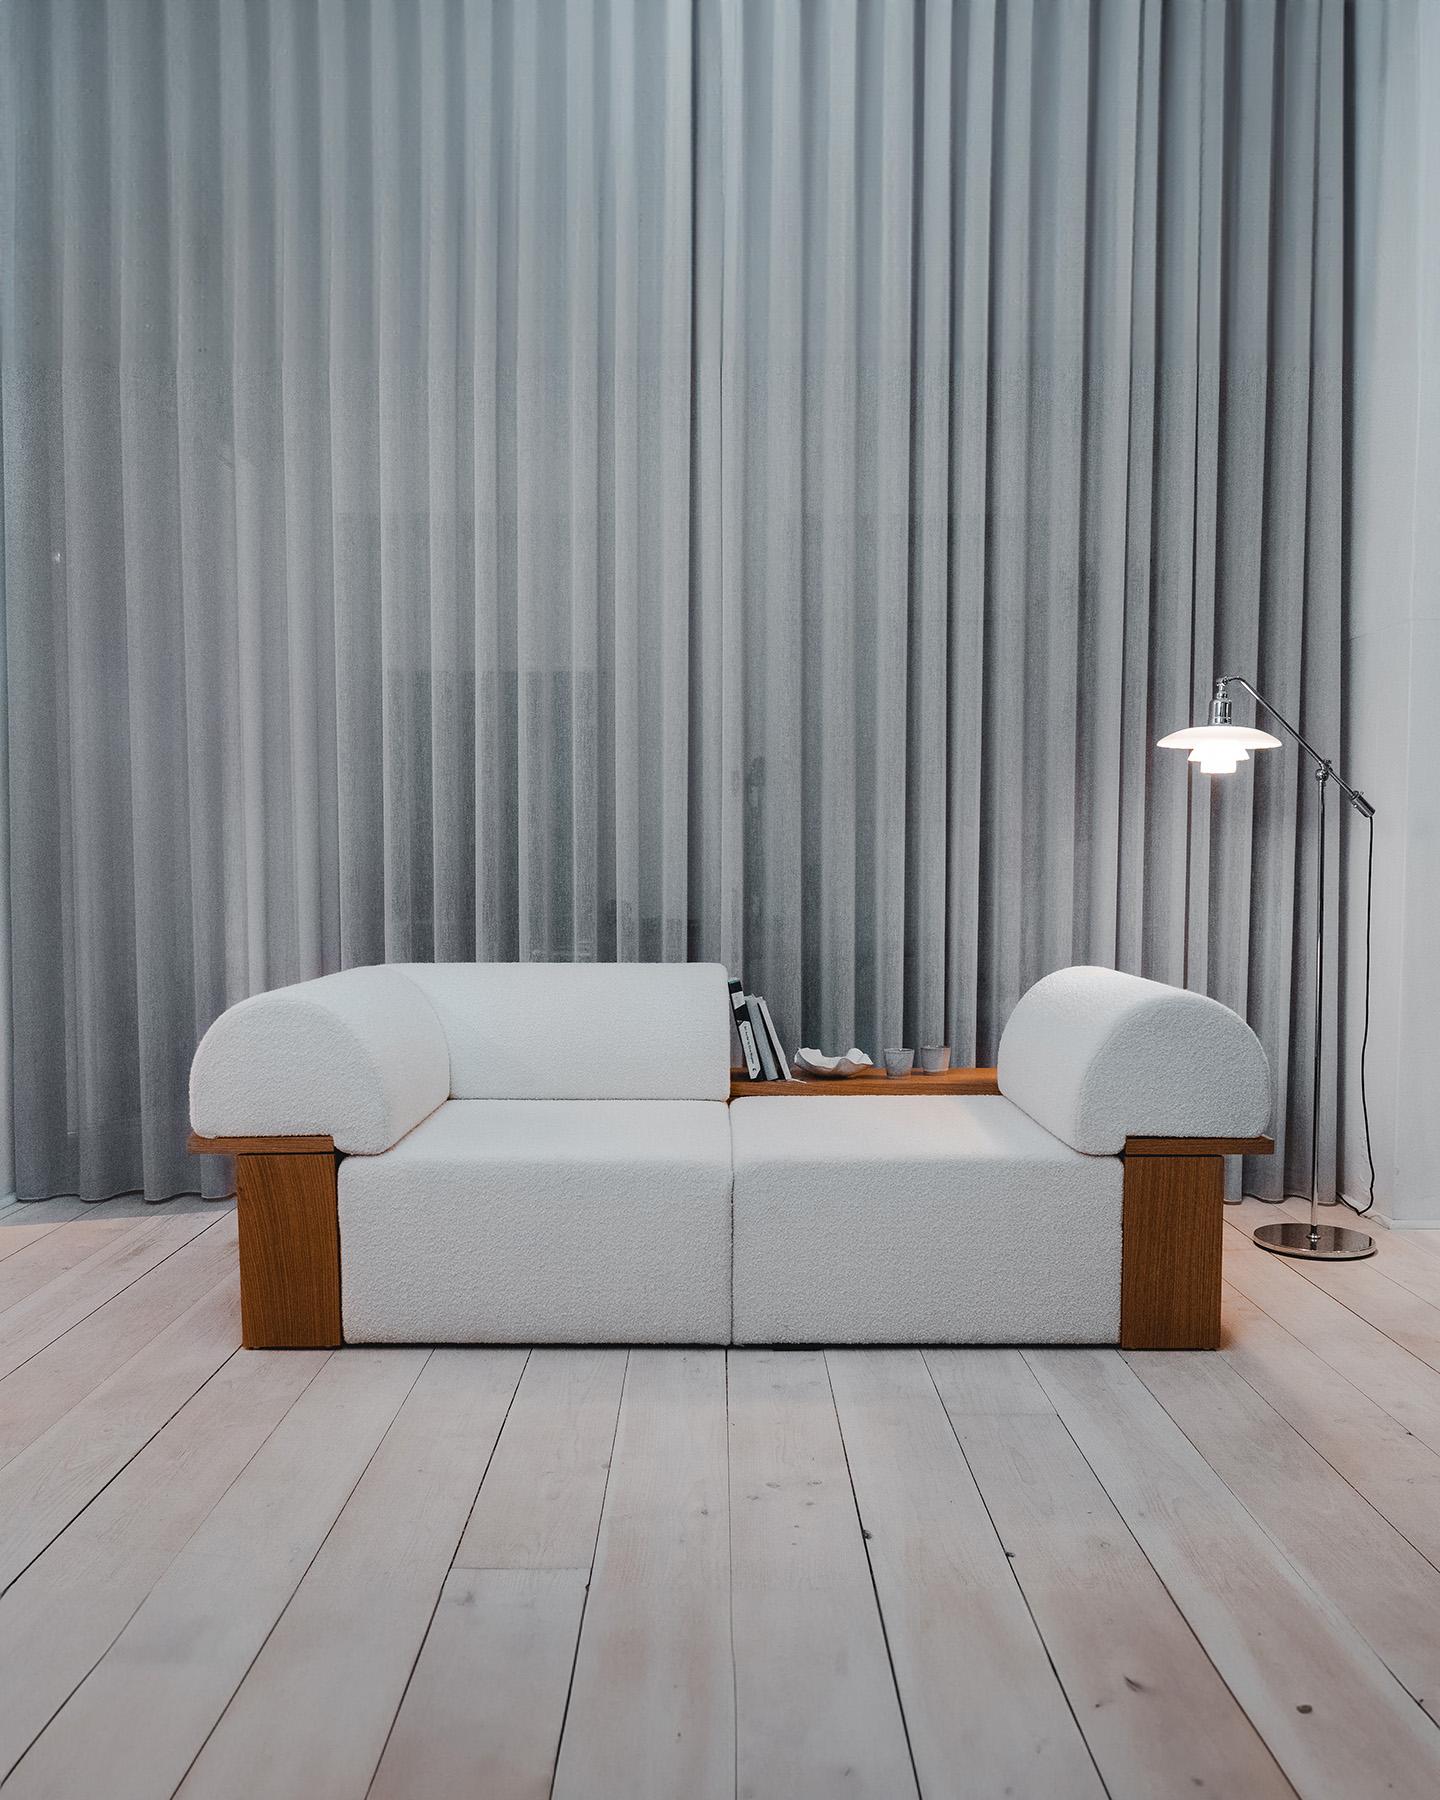 Designed by Caisa Leifsdotter for ToneArt and based on historical designs by her architect father, the Wittorin Sofa is a modular sofa configuration.

The design language of the series prioritizes functionality and flexibility through customization.